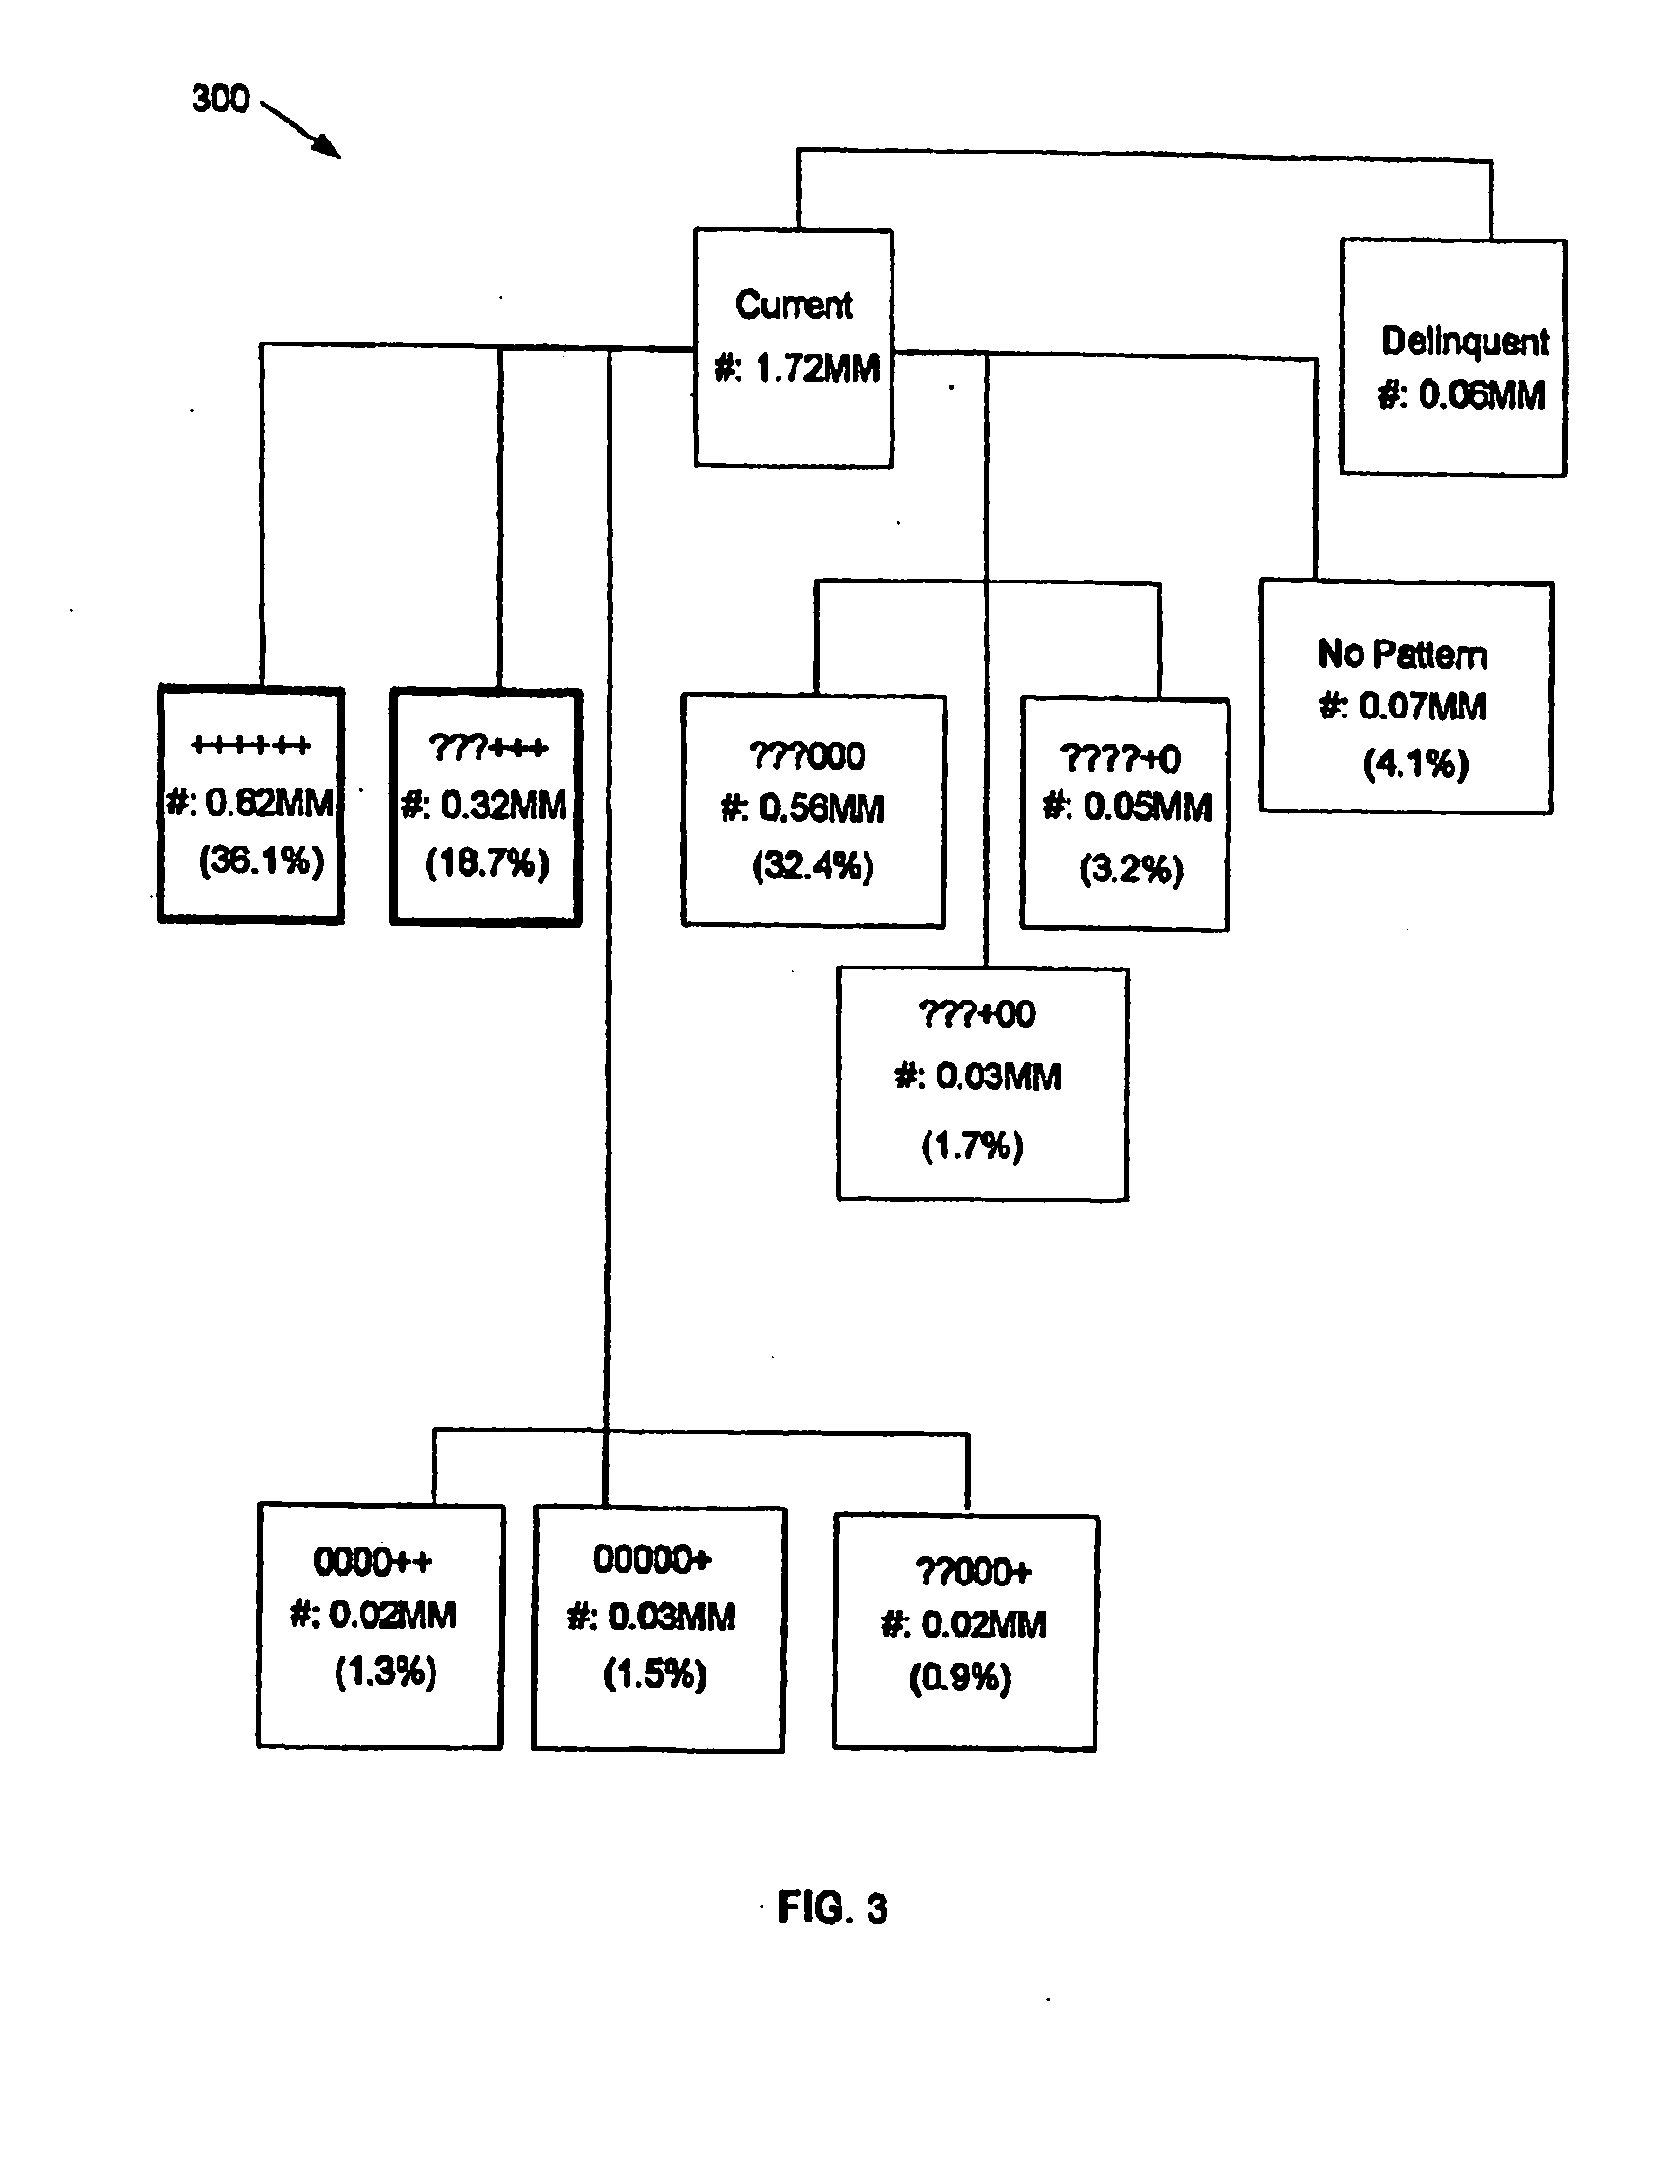 Method and apparatus for targeting best customers based on spend capacity